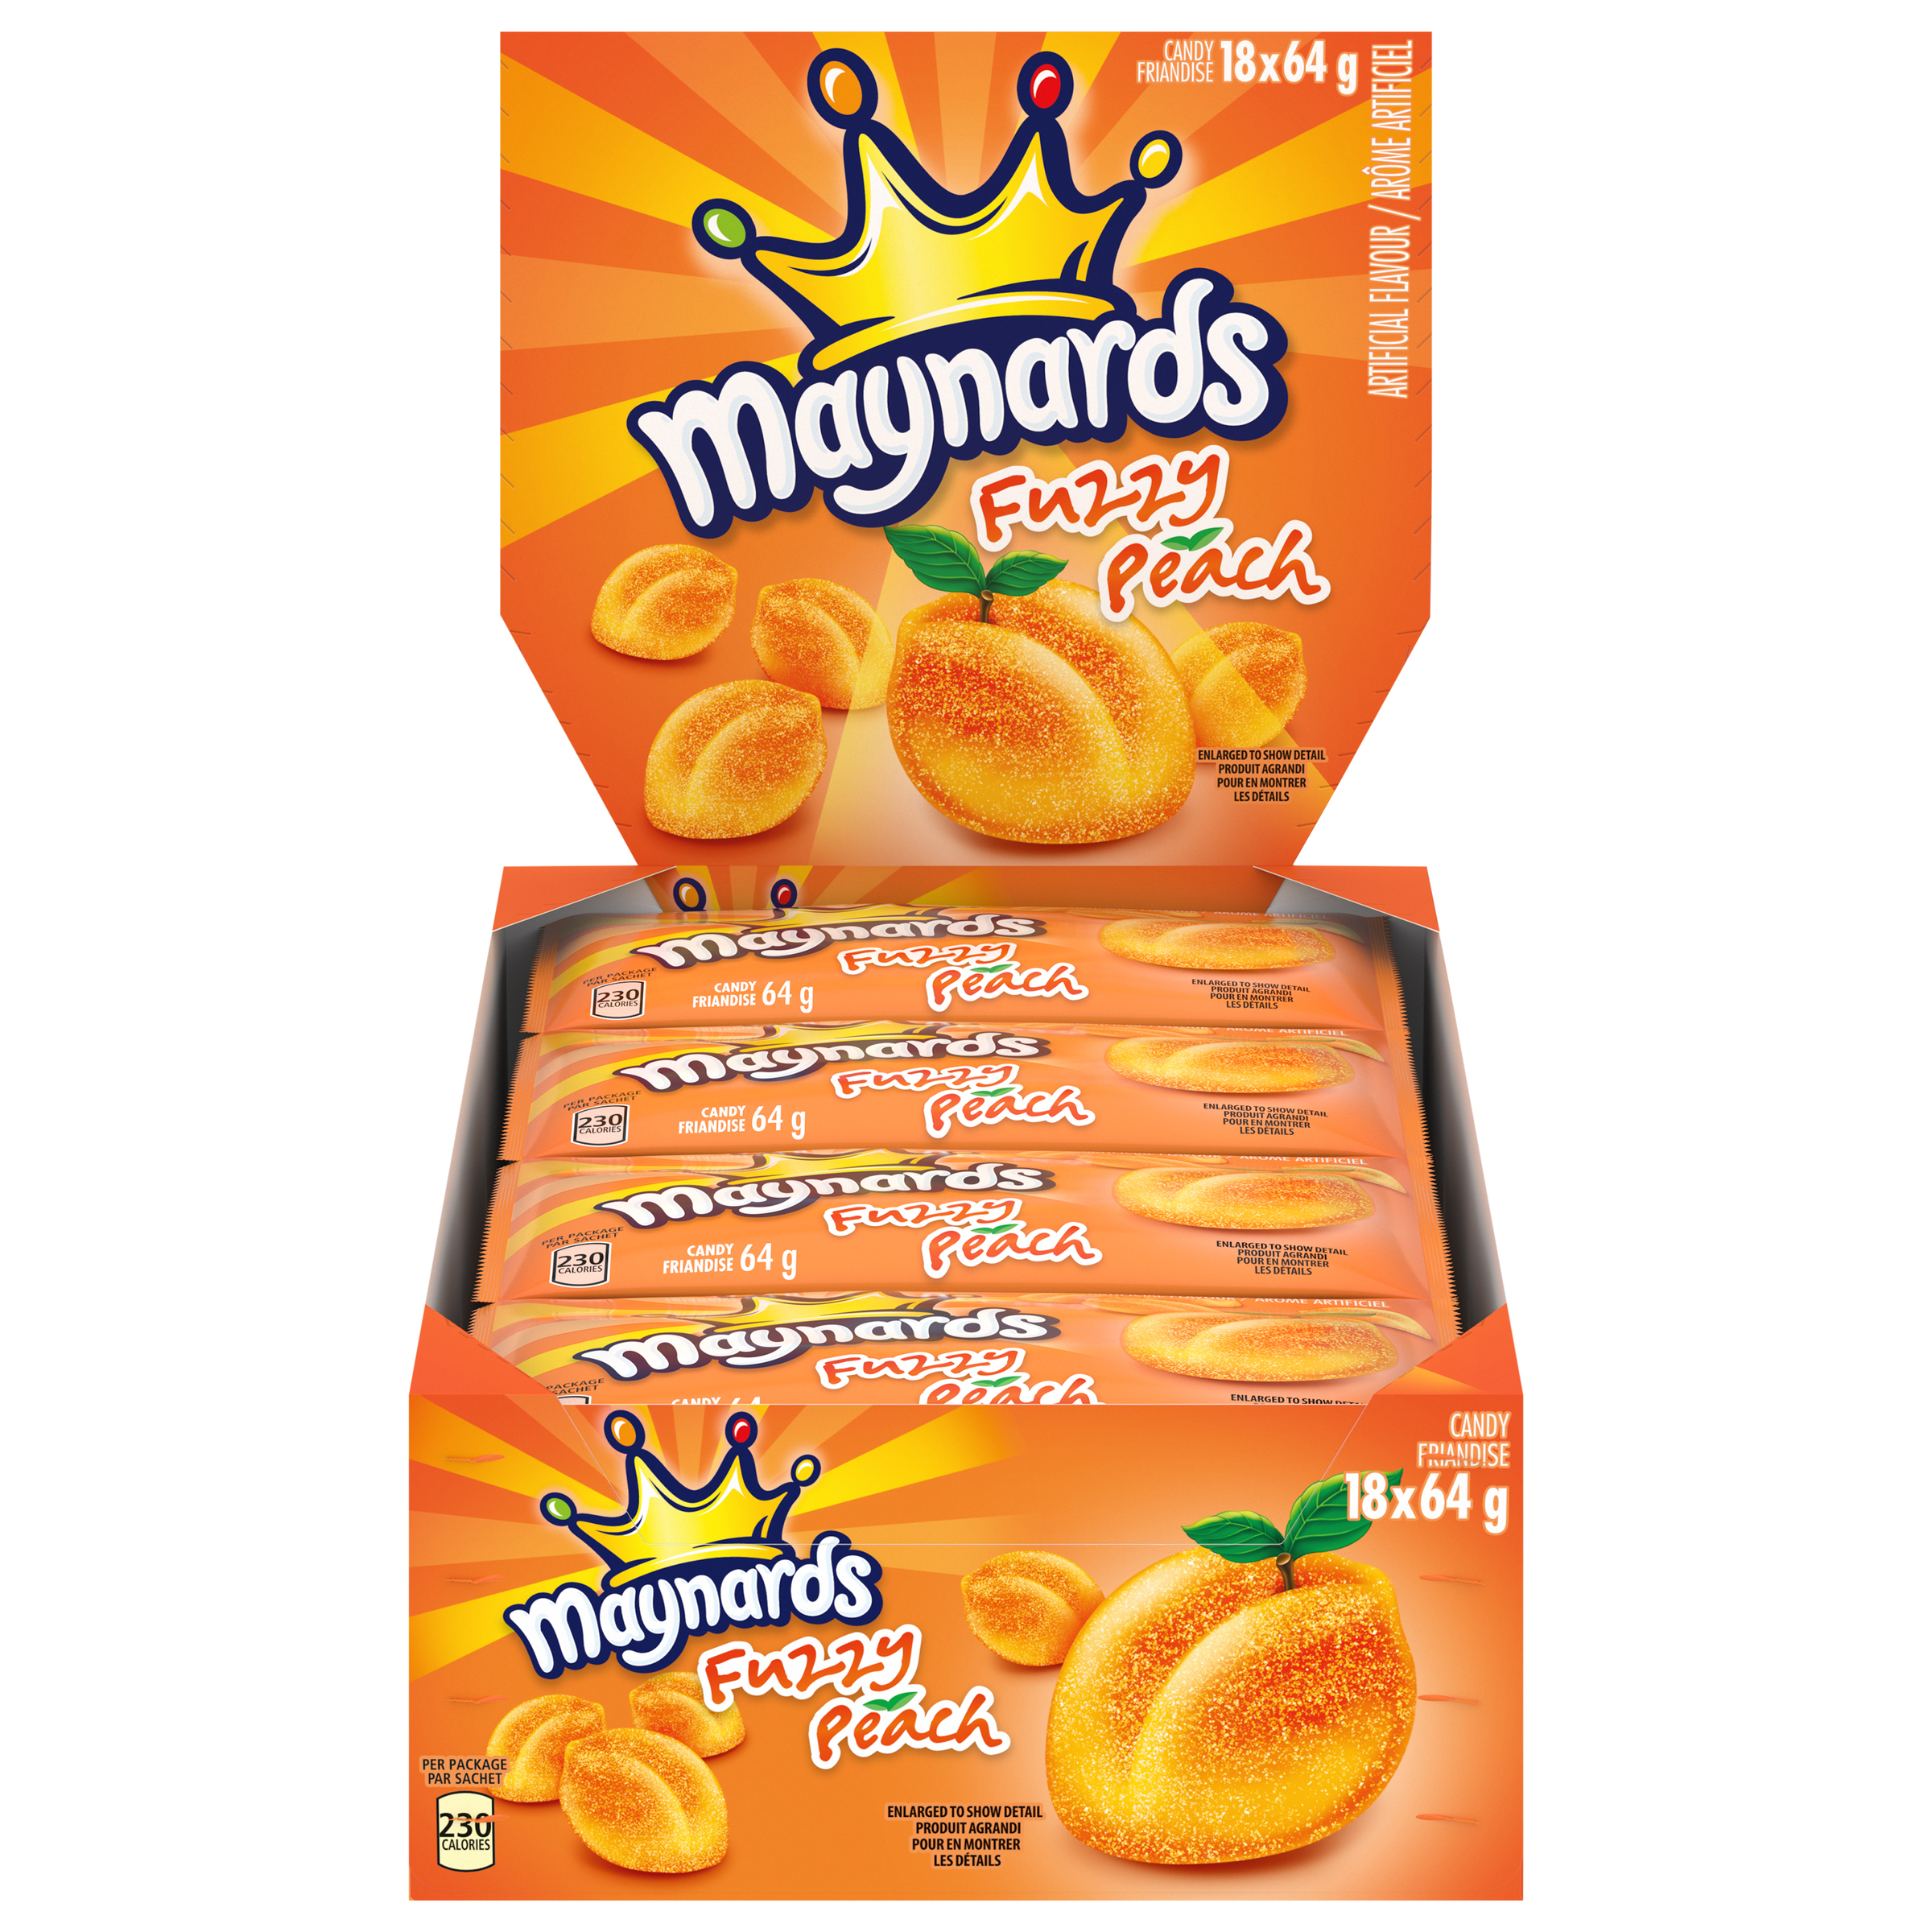 Maynards Fuzzy Peach Candy, 64g, (Pack of 18)-0